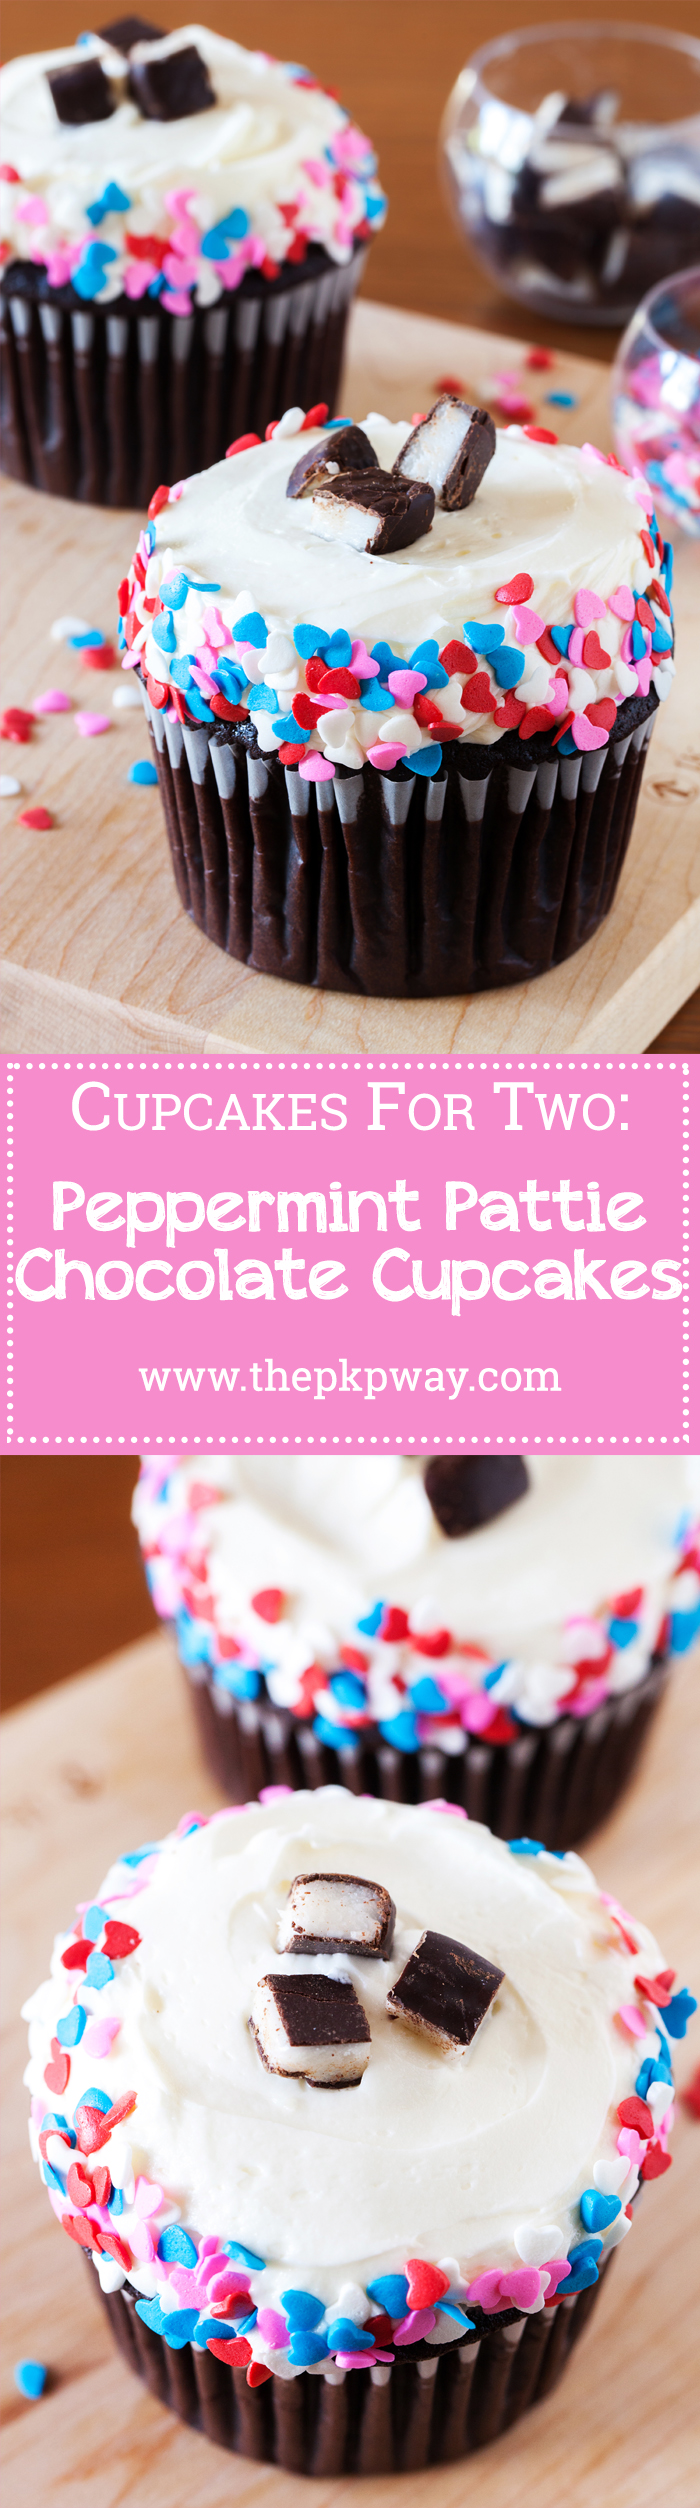 Valentine's Day Peppermint Pattie Chocolate Cupcakes for Two. A chocolate cupcake recipe for two is perfect for you and your Valentine. Ultra-moist and topped with peppermint pattie buttercream.